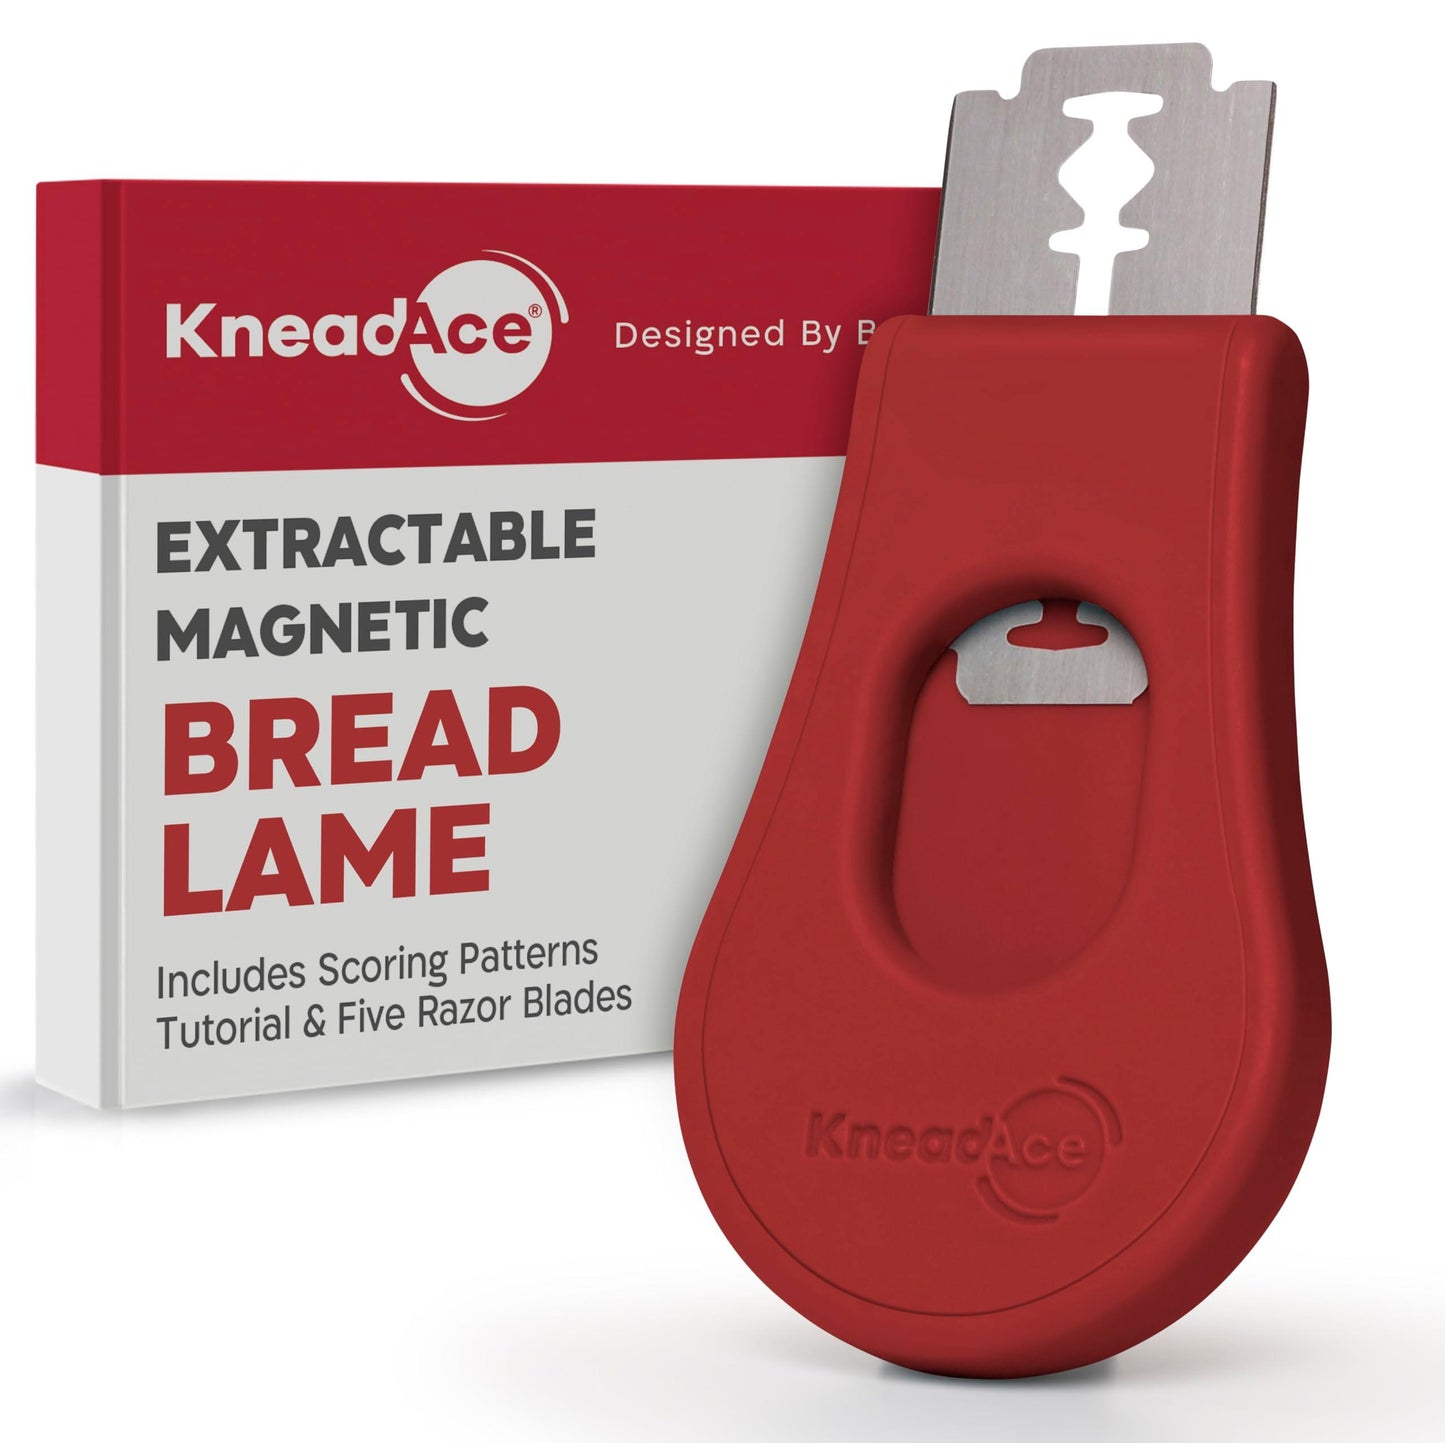 KNEADACE Extractable & Magnetic Bread Lame Dough Scoring Tool - Professional Sourdough scoring tool for Sourdough Bread baking & Bread Making Tools - Scoring Patterns booklet & 5 Razor Blades - CookCave